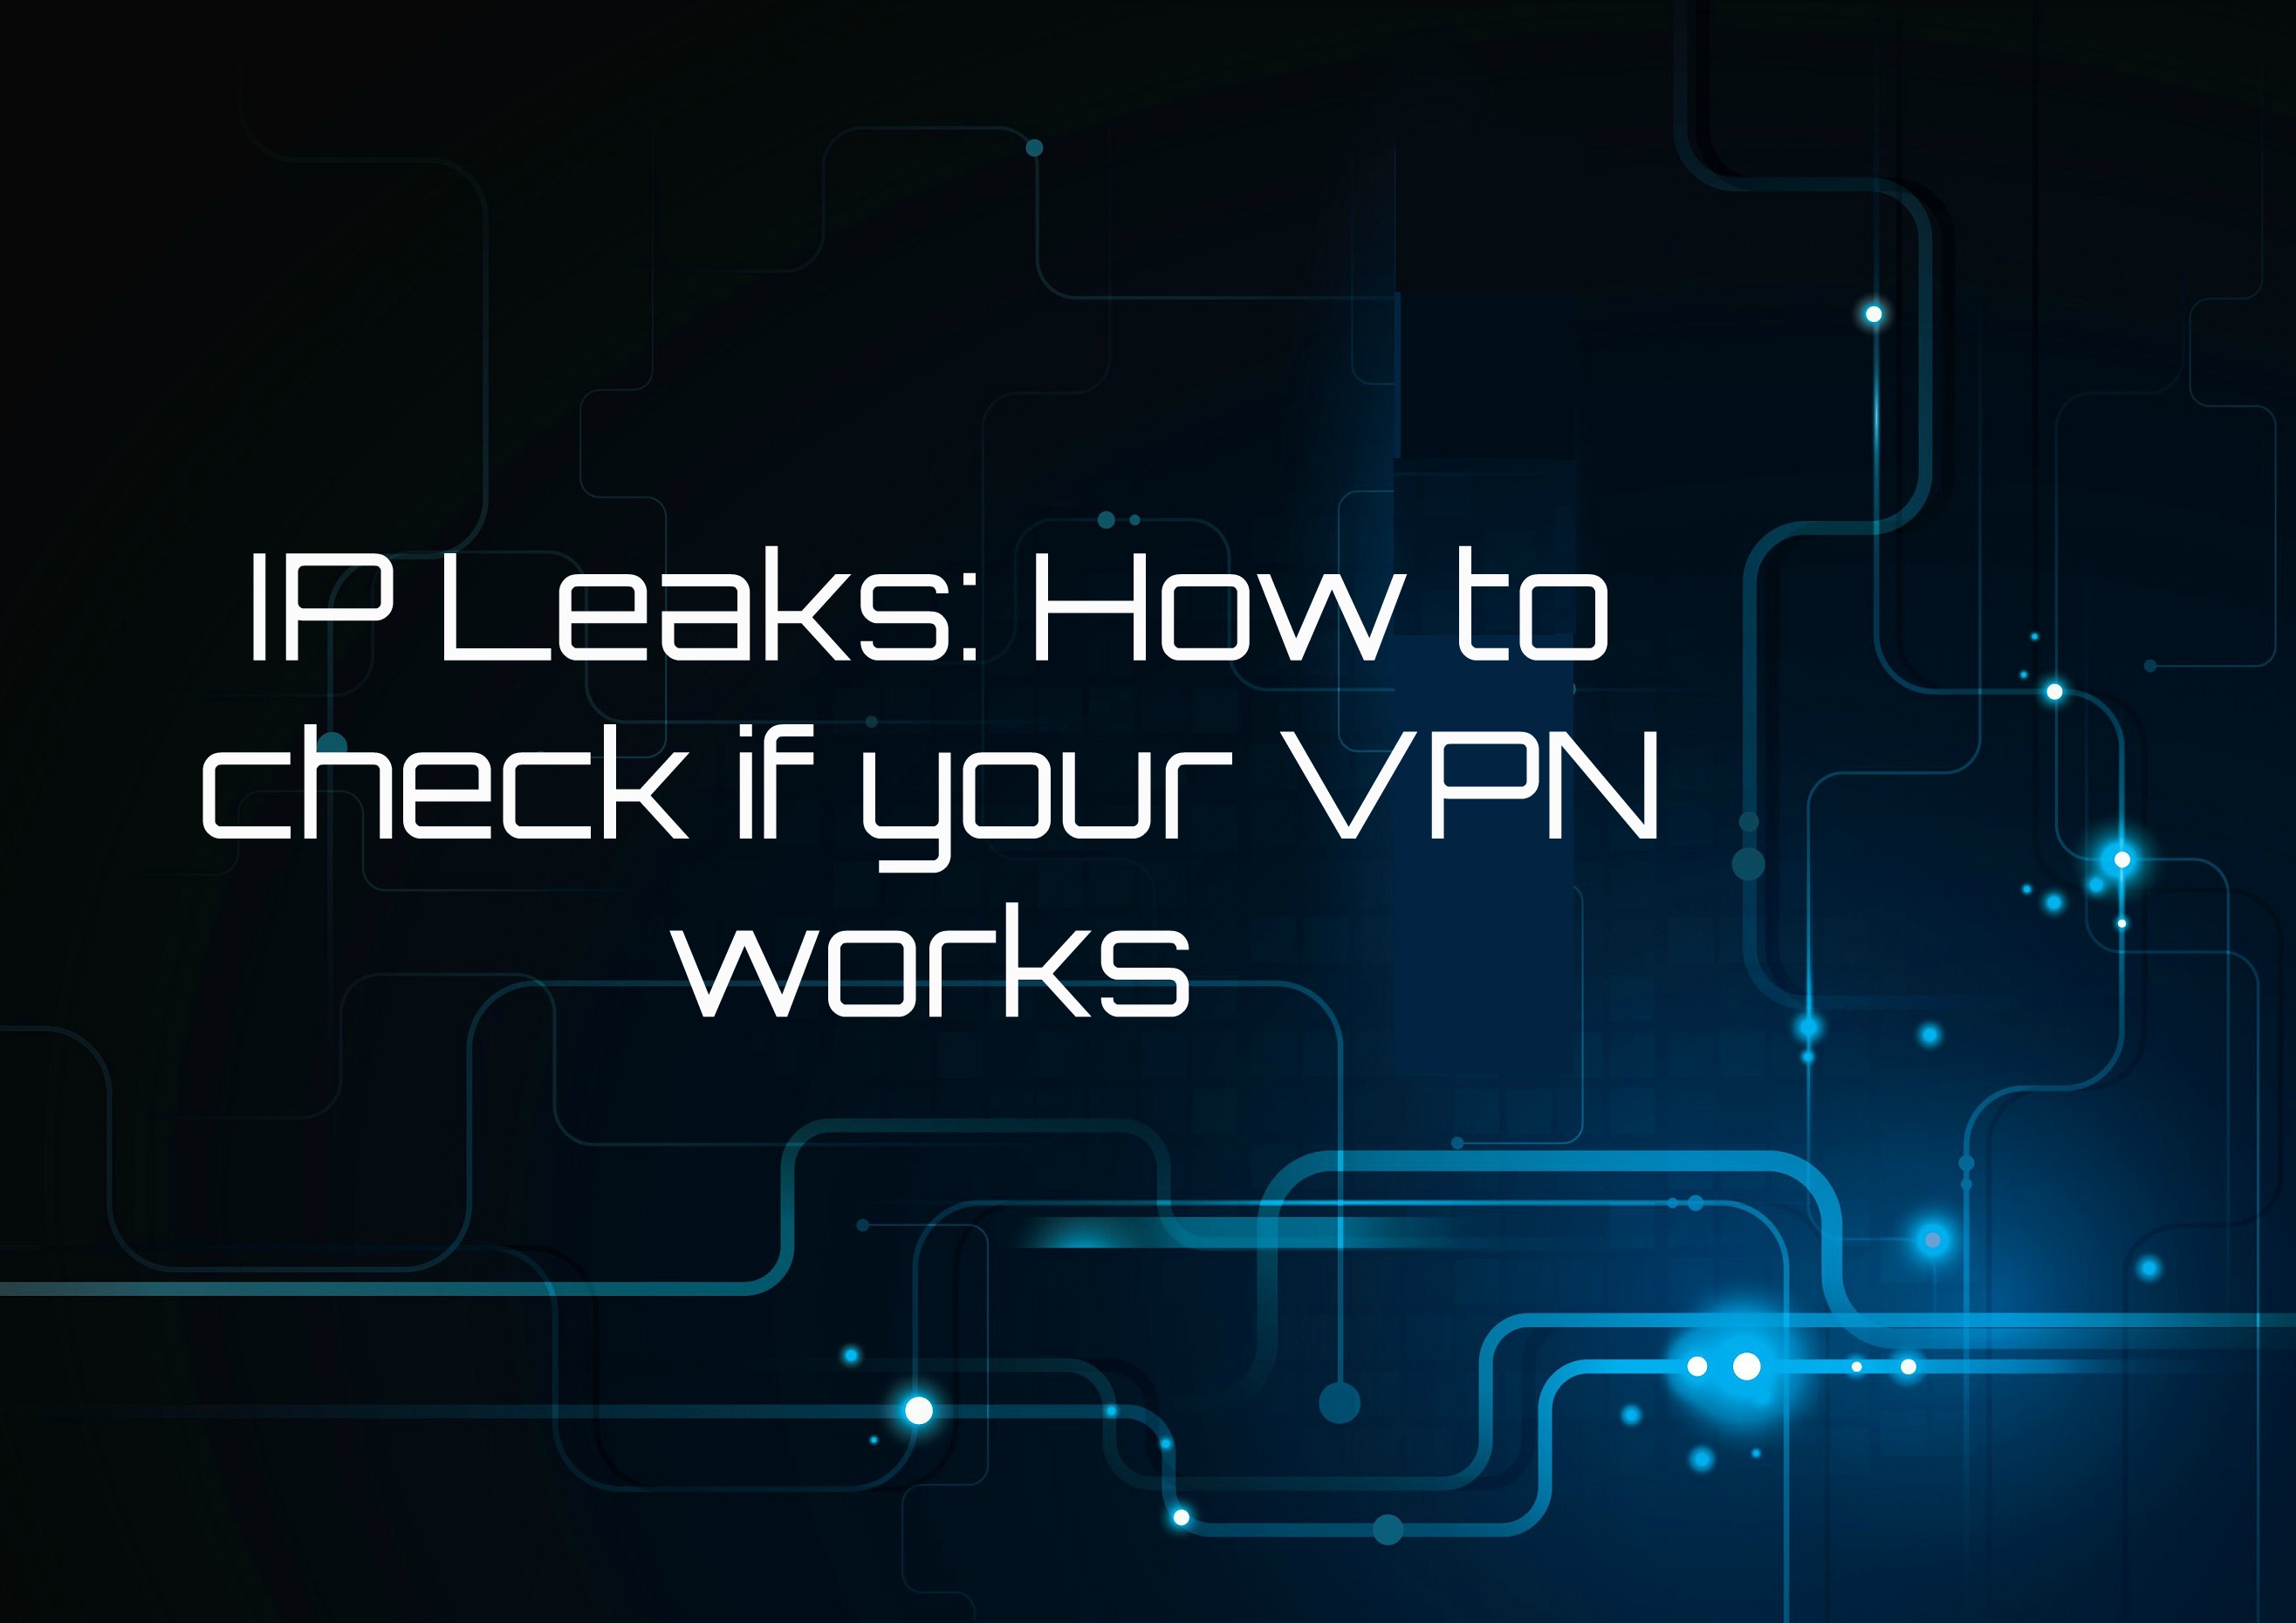 IP Leaks: How to Check if Your VPN Works